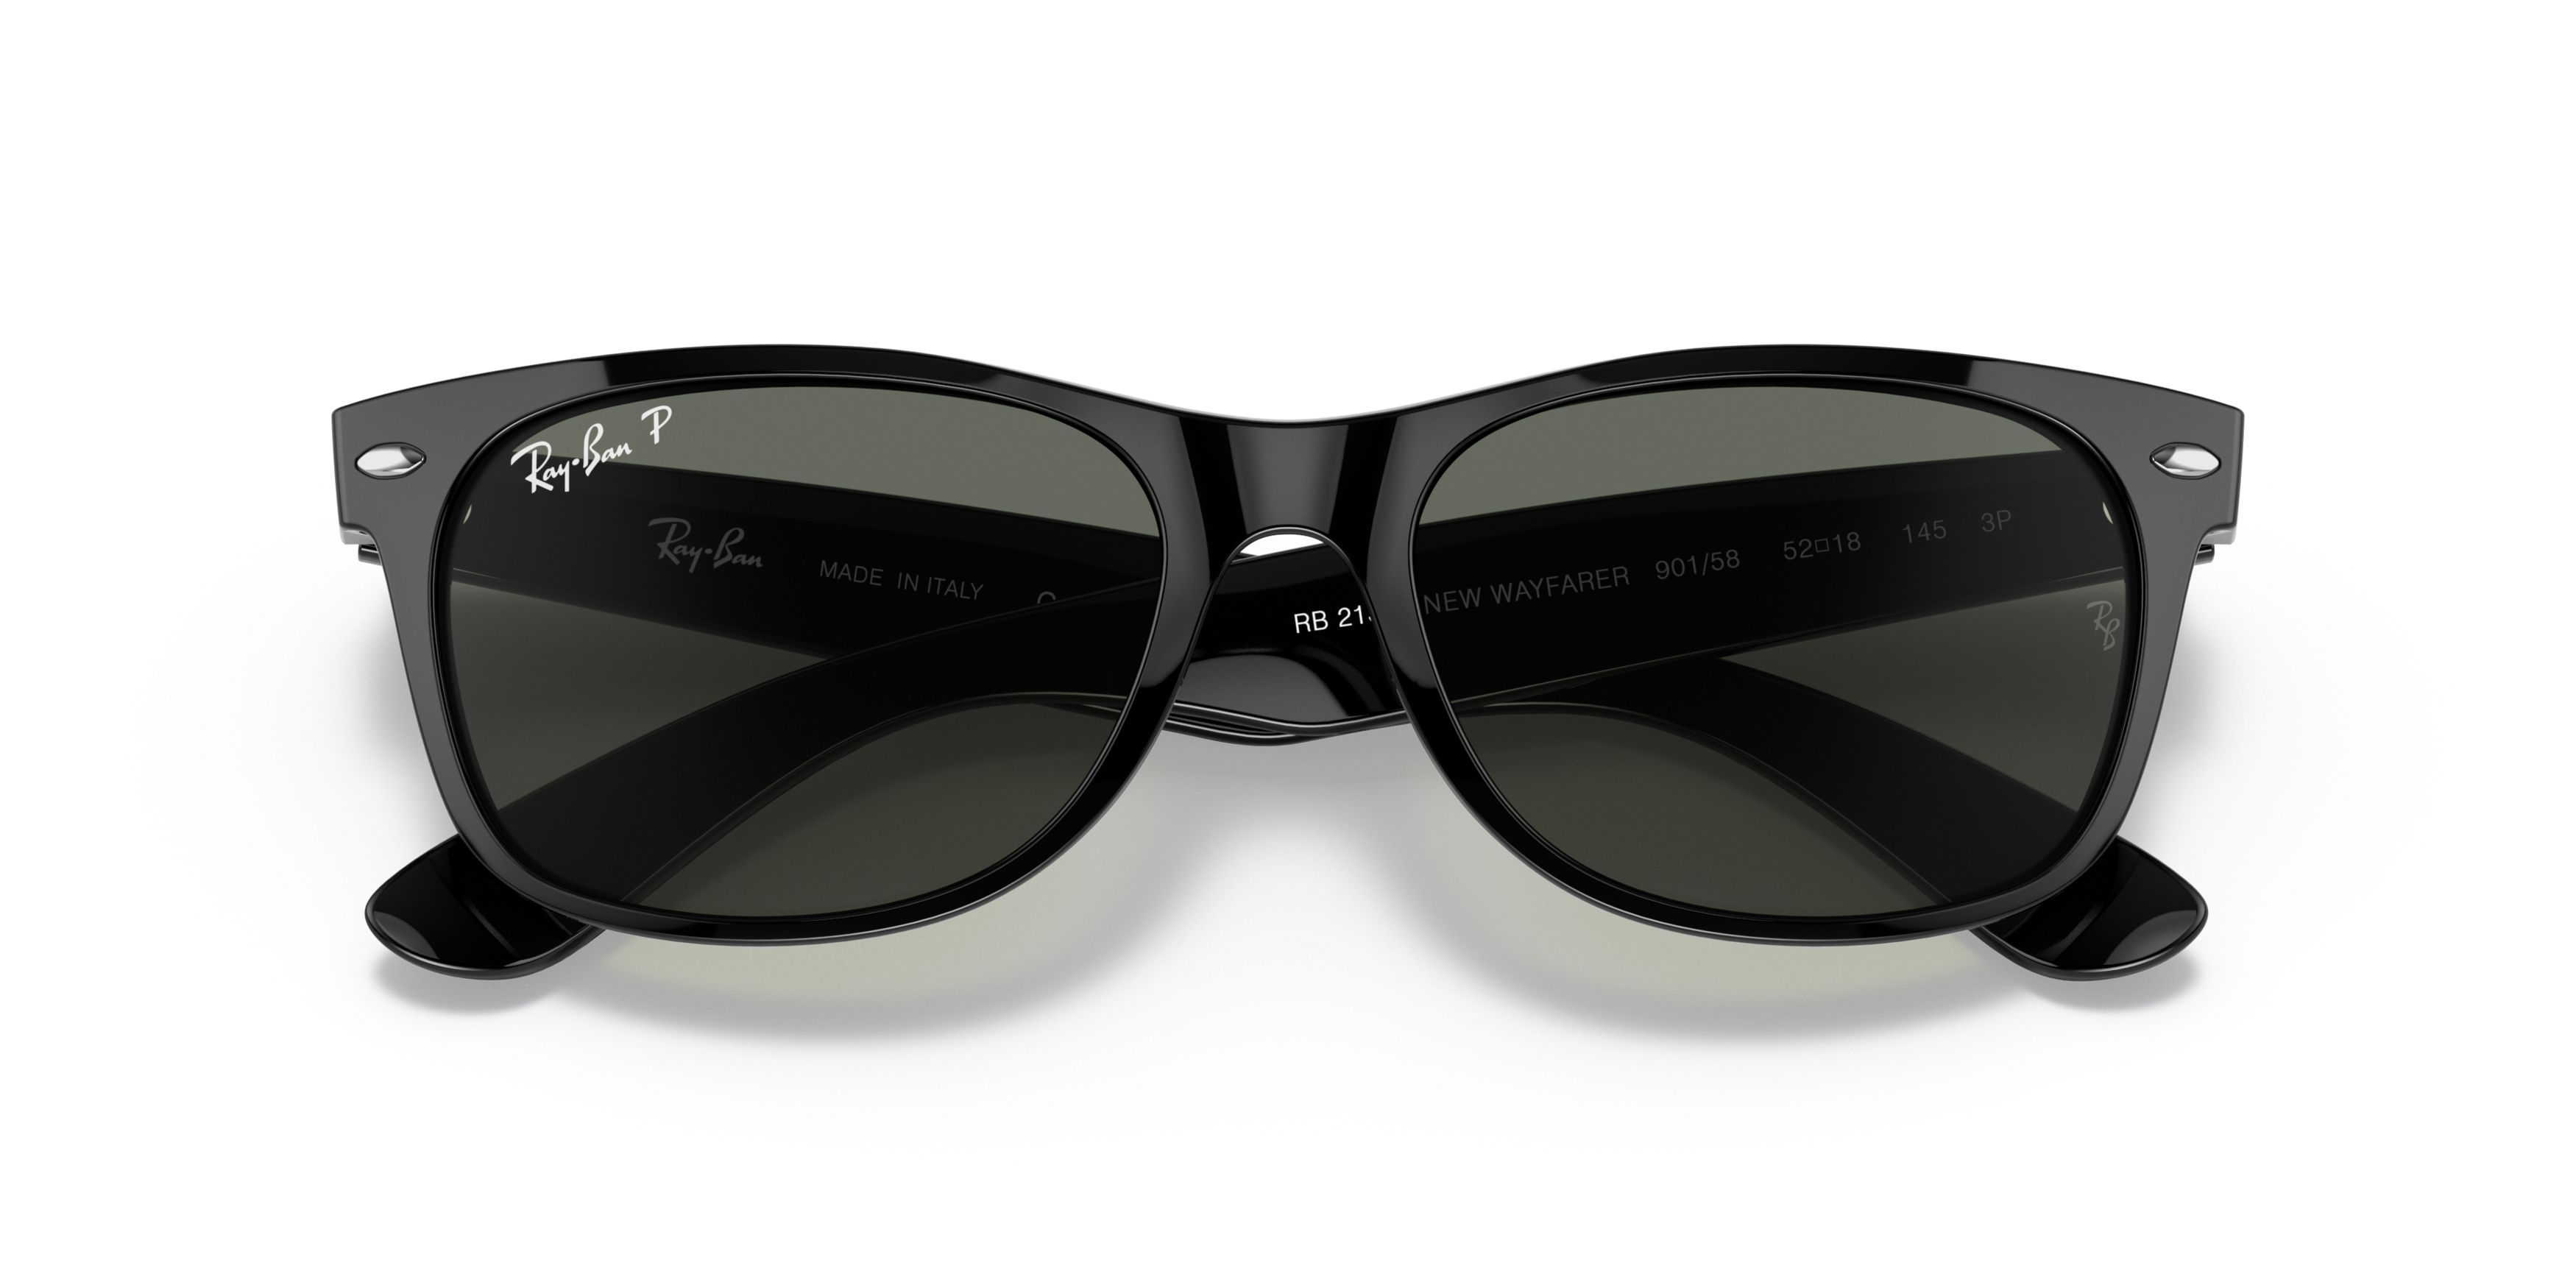 [products.image.folded] Ray-Ban NEW WAYFARER RB2132 901/58